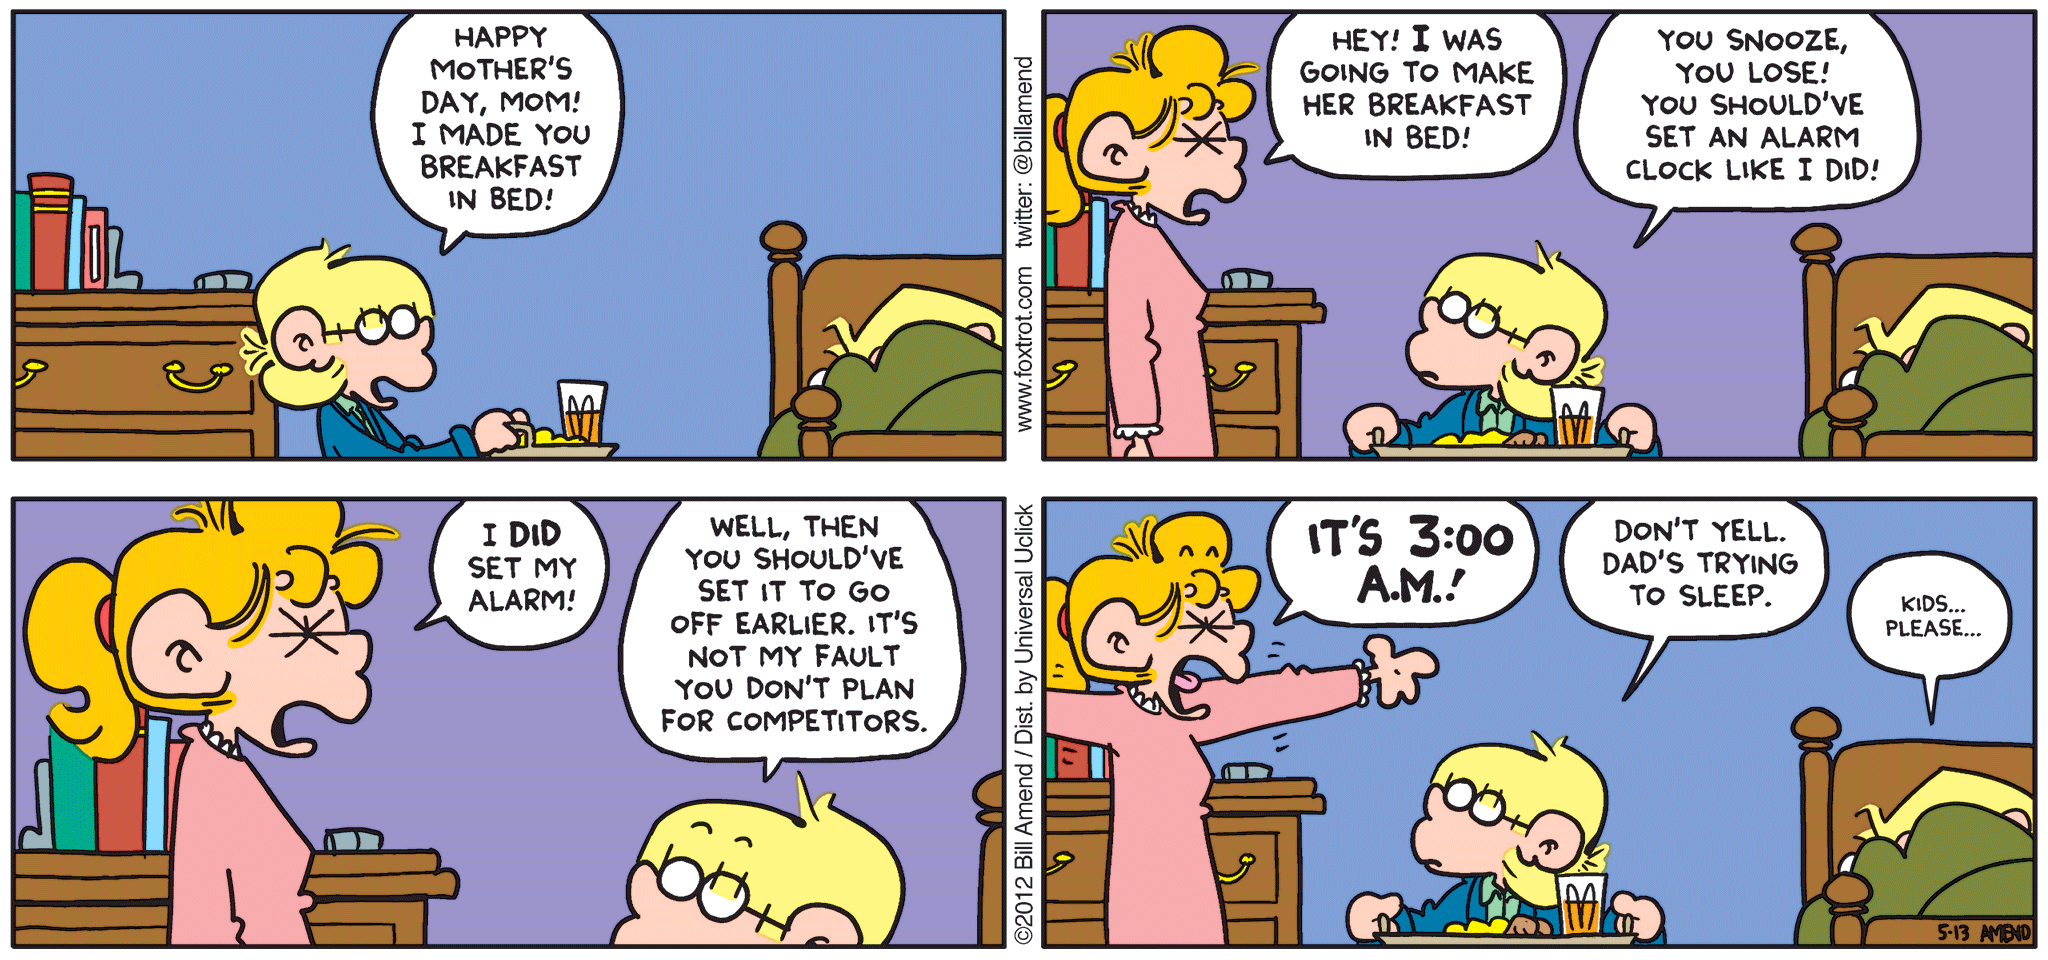 FoxTrot comic strip by Bill Amend - "You Snooze You Lose published May 13, 2012 - Jason: Happy Mother's Day, Mom! I made you breakfast in bed! Paige: Hey! I was going to make her breakfast in bed! Jason: You snooze, you lose! You should've set an alarm clock like I did! Paige: I DID set my alarm! Jason: Well, then you should've set it to go off earlier. It's not my fault you didn't plan for competitors. Pagie: IT'S 3:00 A.M.! Jason: Don't yell. Dad's trying to sleep. Andy: Kids....please...